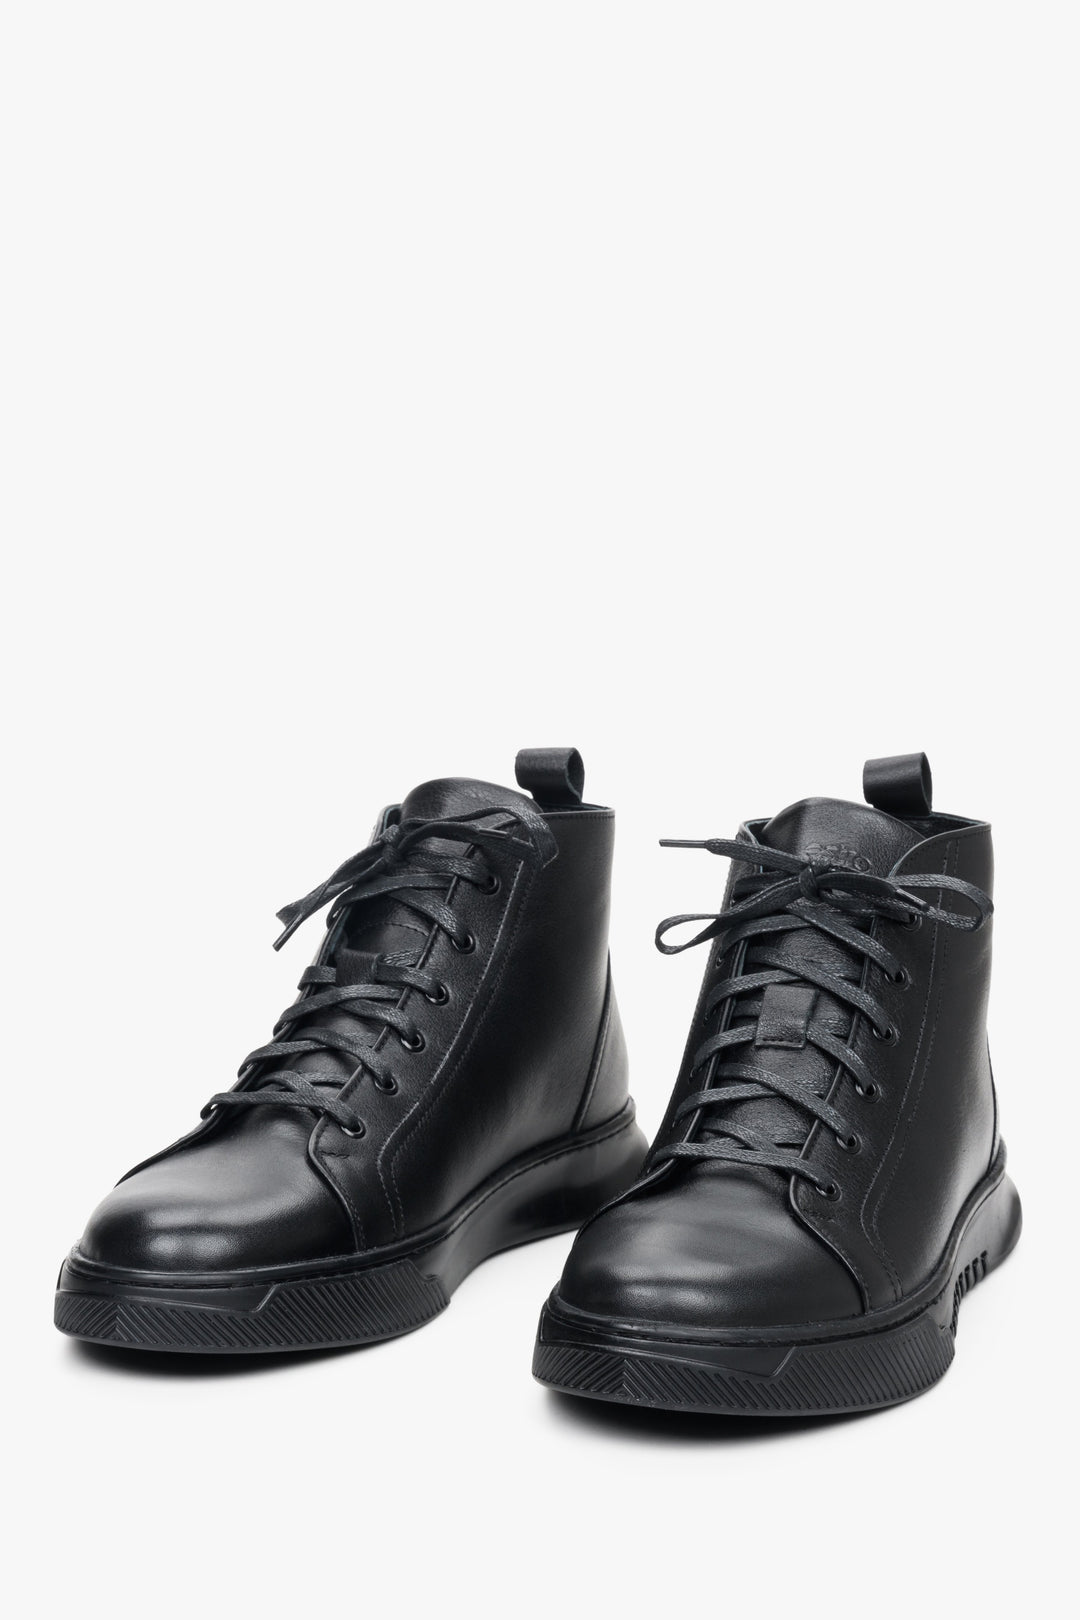 Men's sneakers in black color from natural leather Estro - presentation of shoe toe.